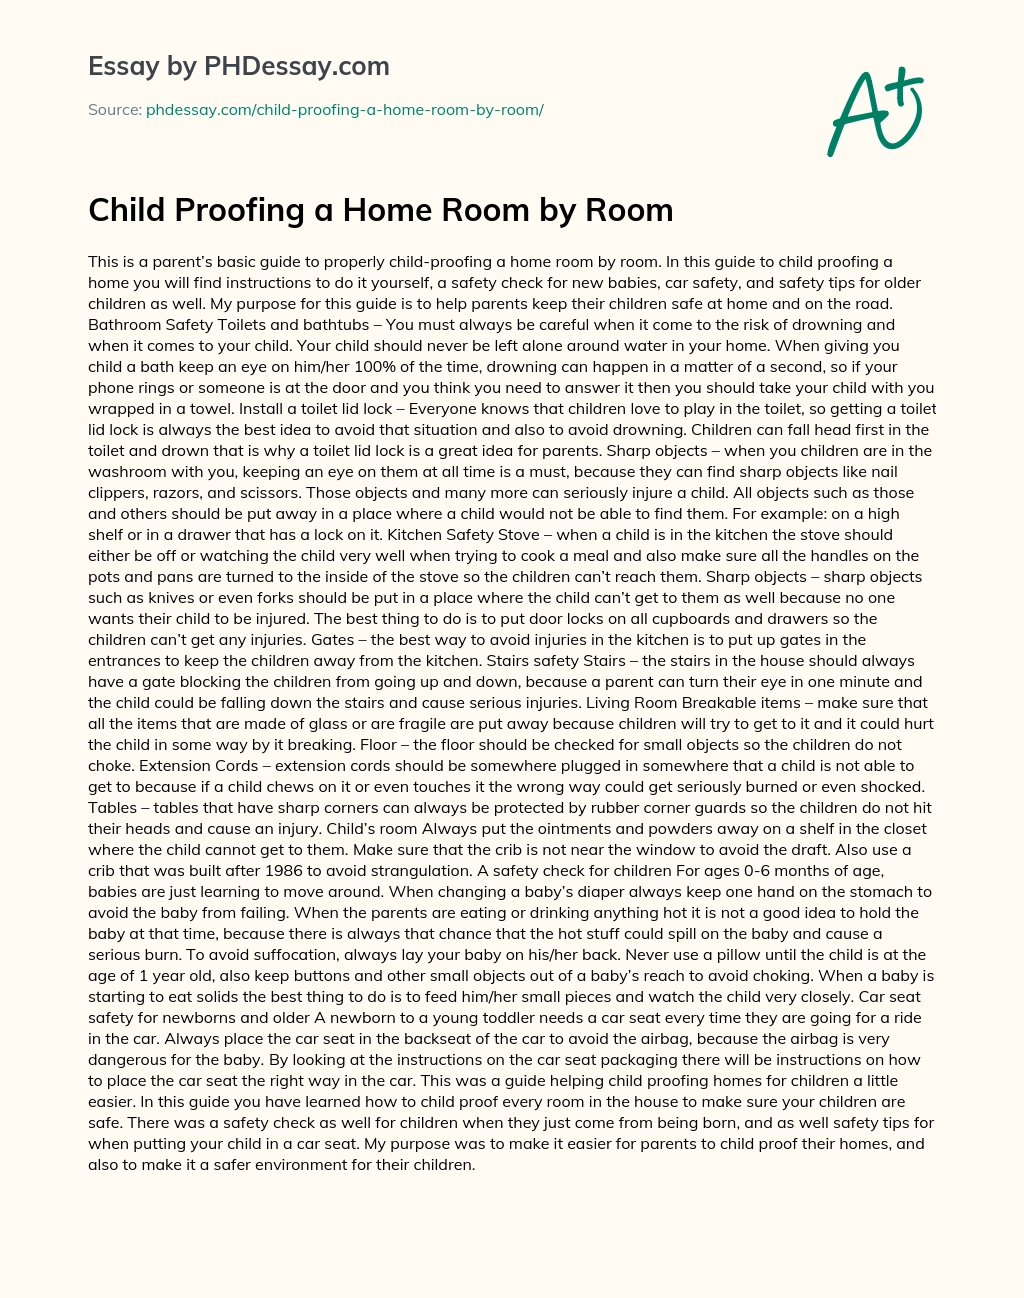 Child Proofing a Home Room by Room essay